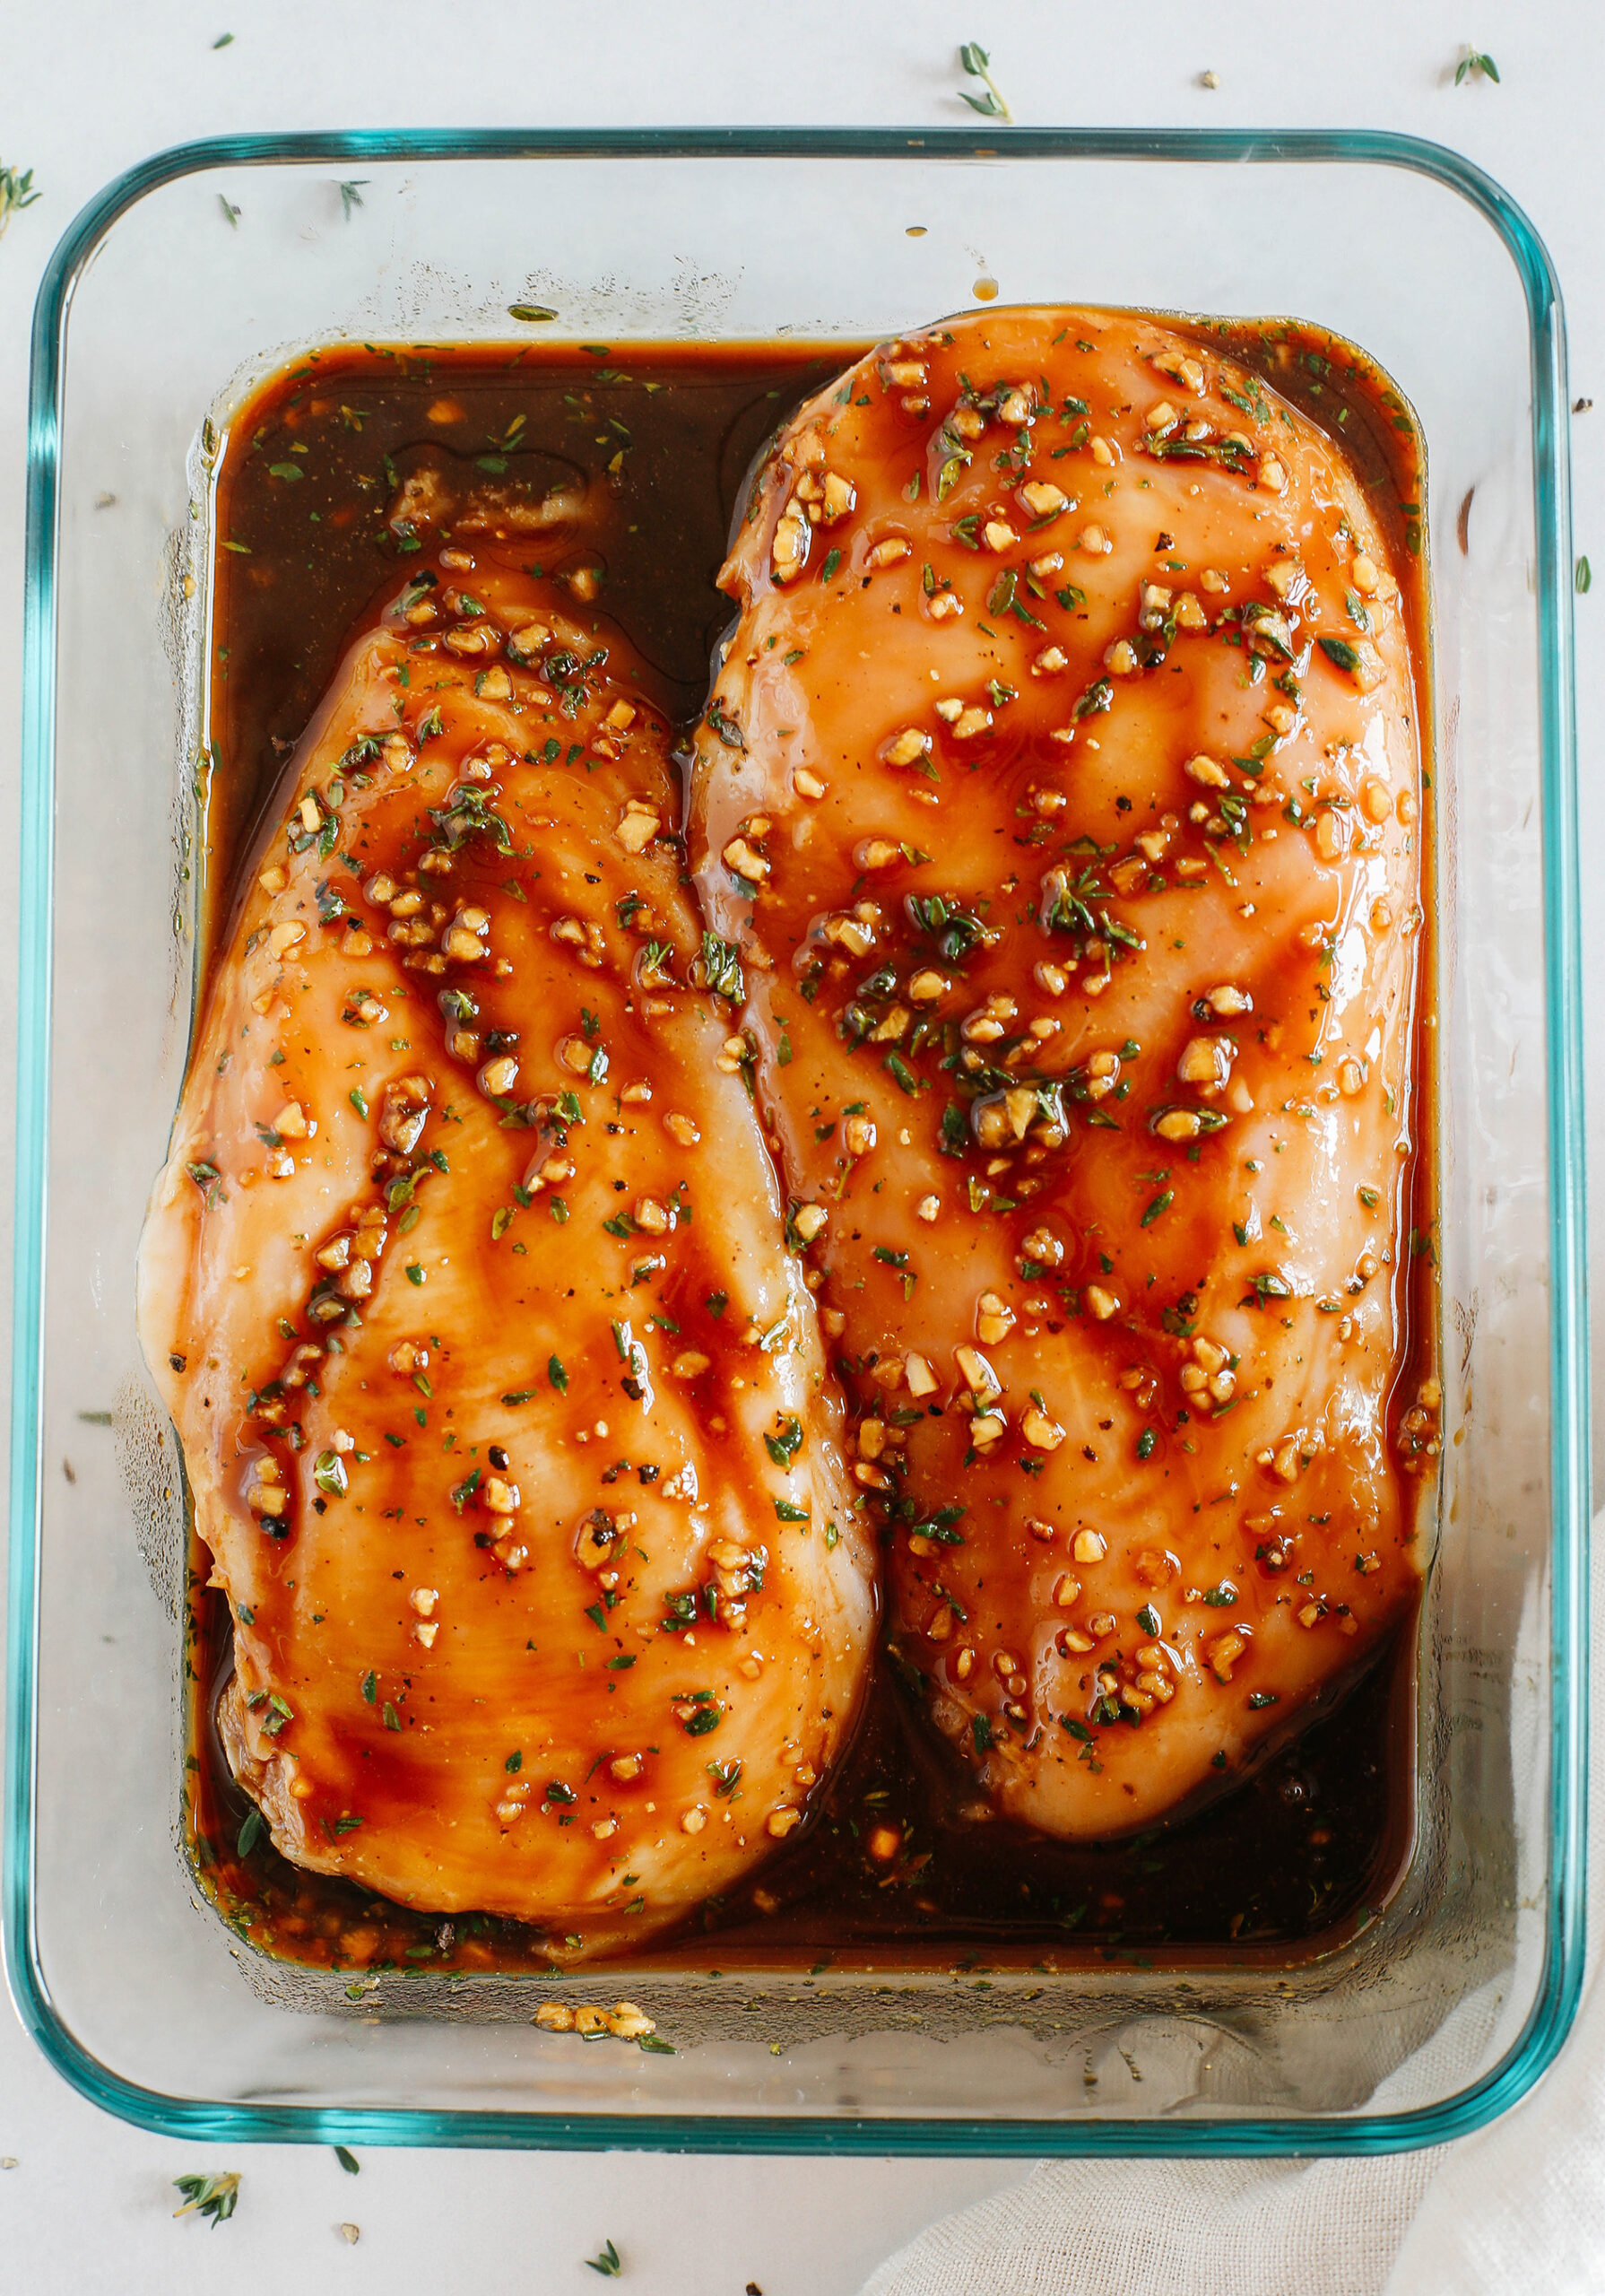 Moist and juicy chicken breasts marinated in a rich maple balsamic herb glaze, seasoned with fresh herbs, and grilled to perfection for a healthy weeknight meal! 